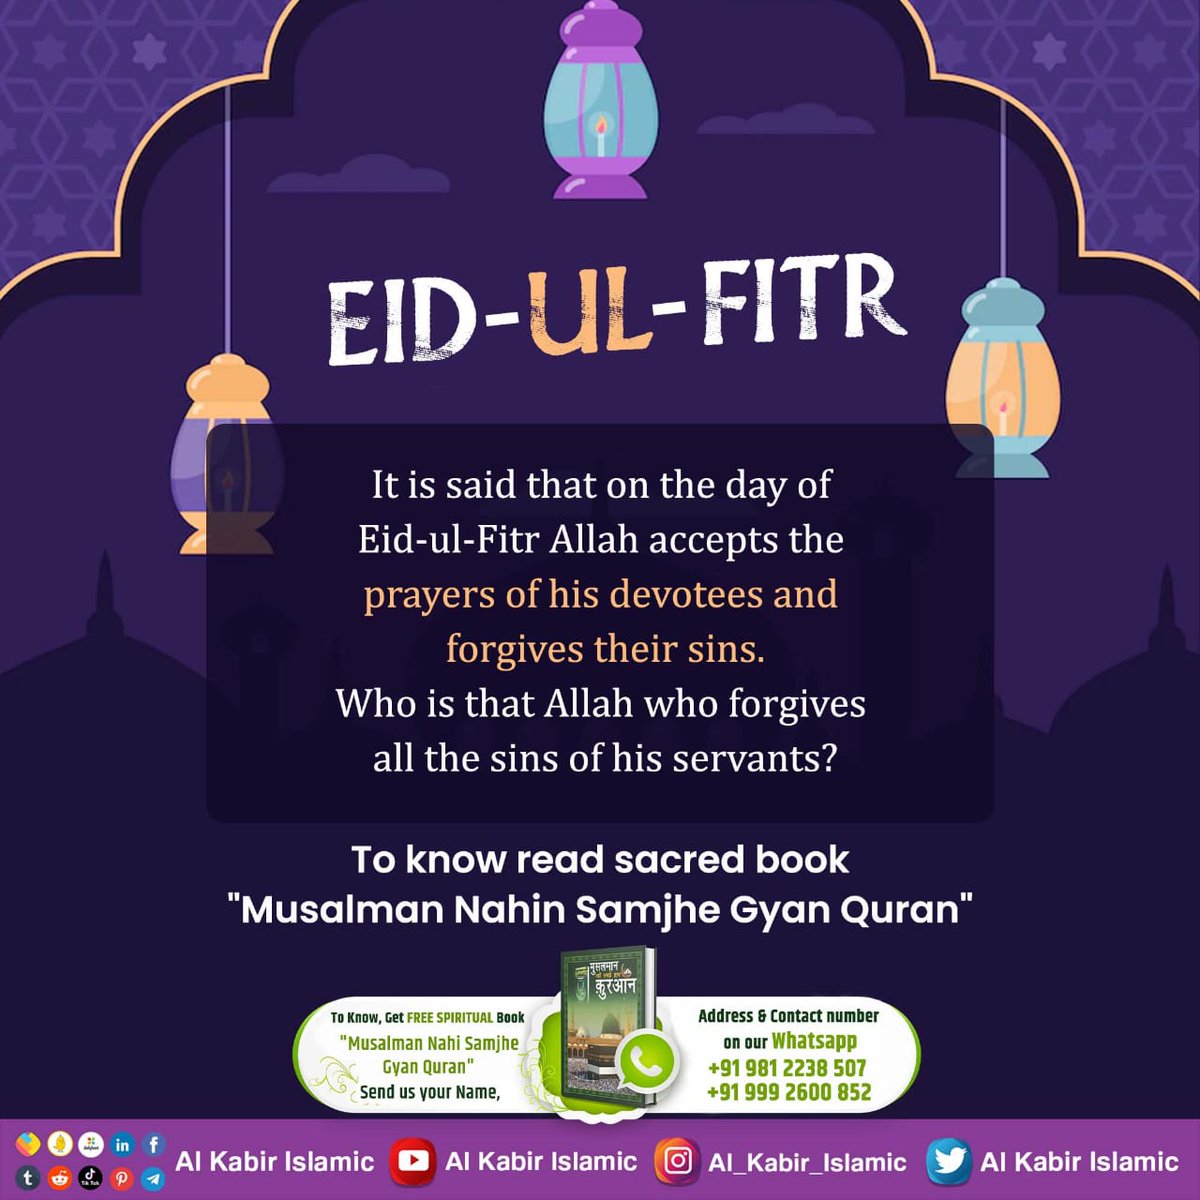 #GodMorningFriday Eid-UL-Fitr It is said that on the day of Eid -Ul-Fitr Allah accept the prayers of his devotees and forgives their sins . Who is that Allah who forgives all the Sins of his Servants ❓ #अल्लाह_का_इल्म_बाखबर_से_पूछो Baakhabar Sant Rampal Ji